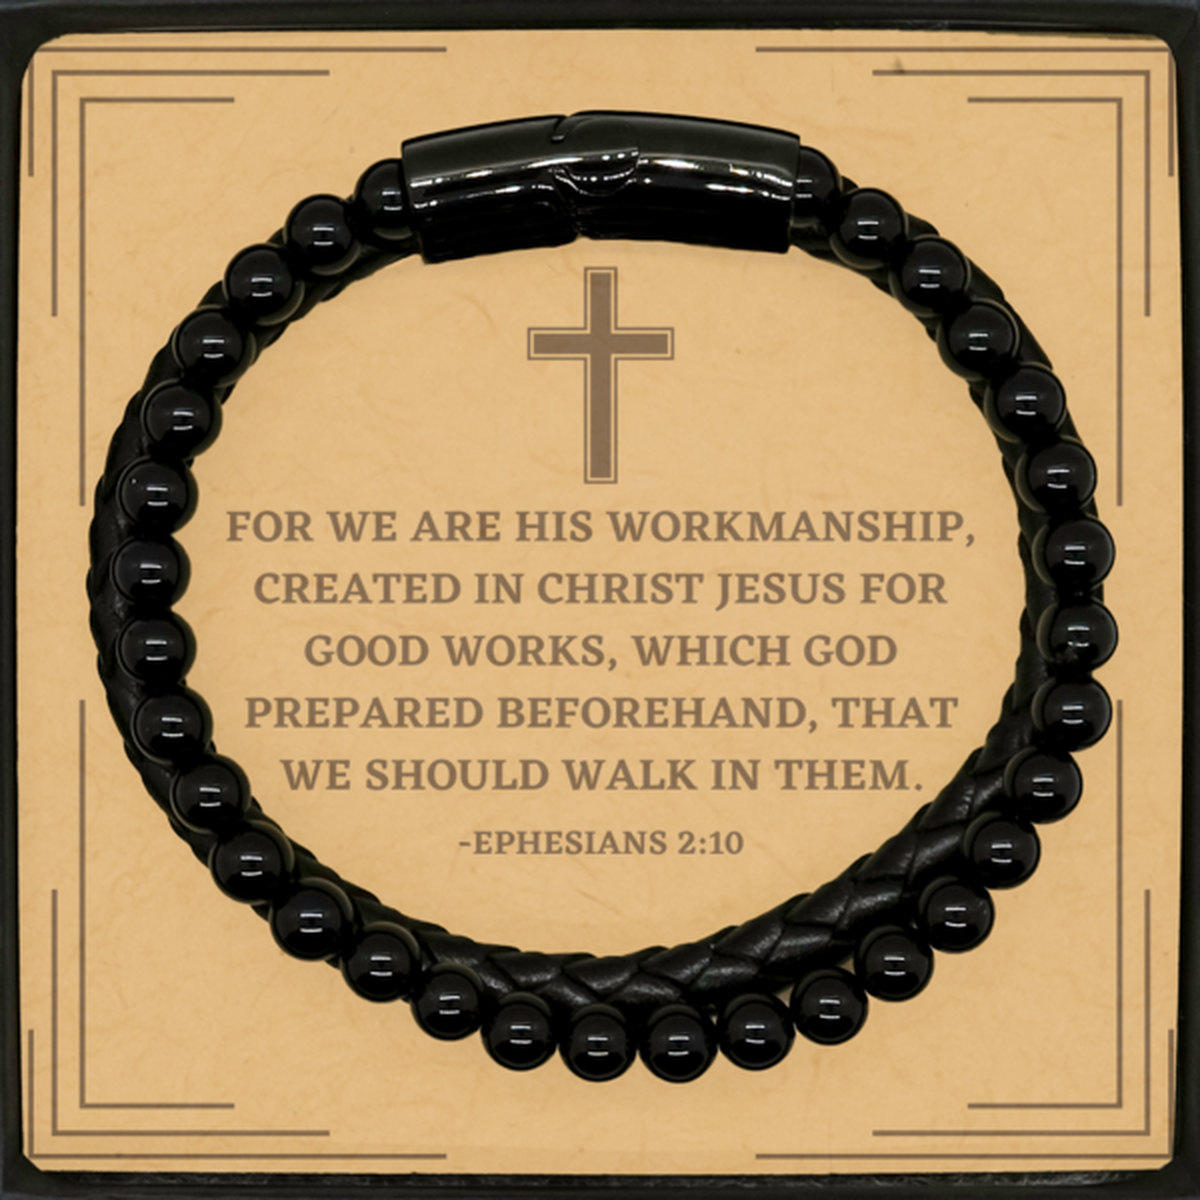 Baptism Gifts For Teenage Boys Girls, Christian Bible Verse Stone Leather Bracelet, For we are His workmanship, Confirmation Gifts, Bible Verse Card for Son, Godson, Grandson